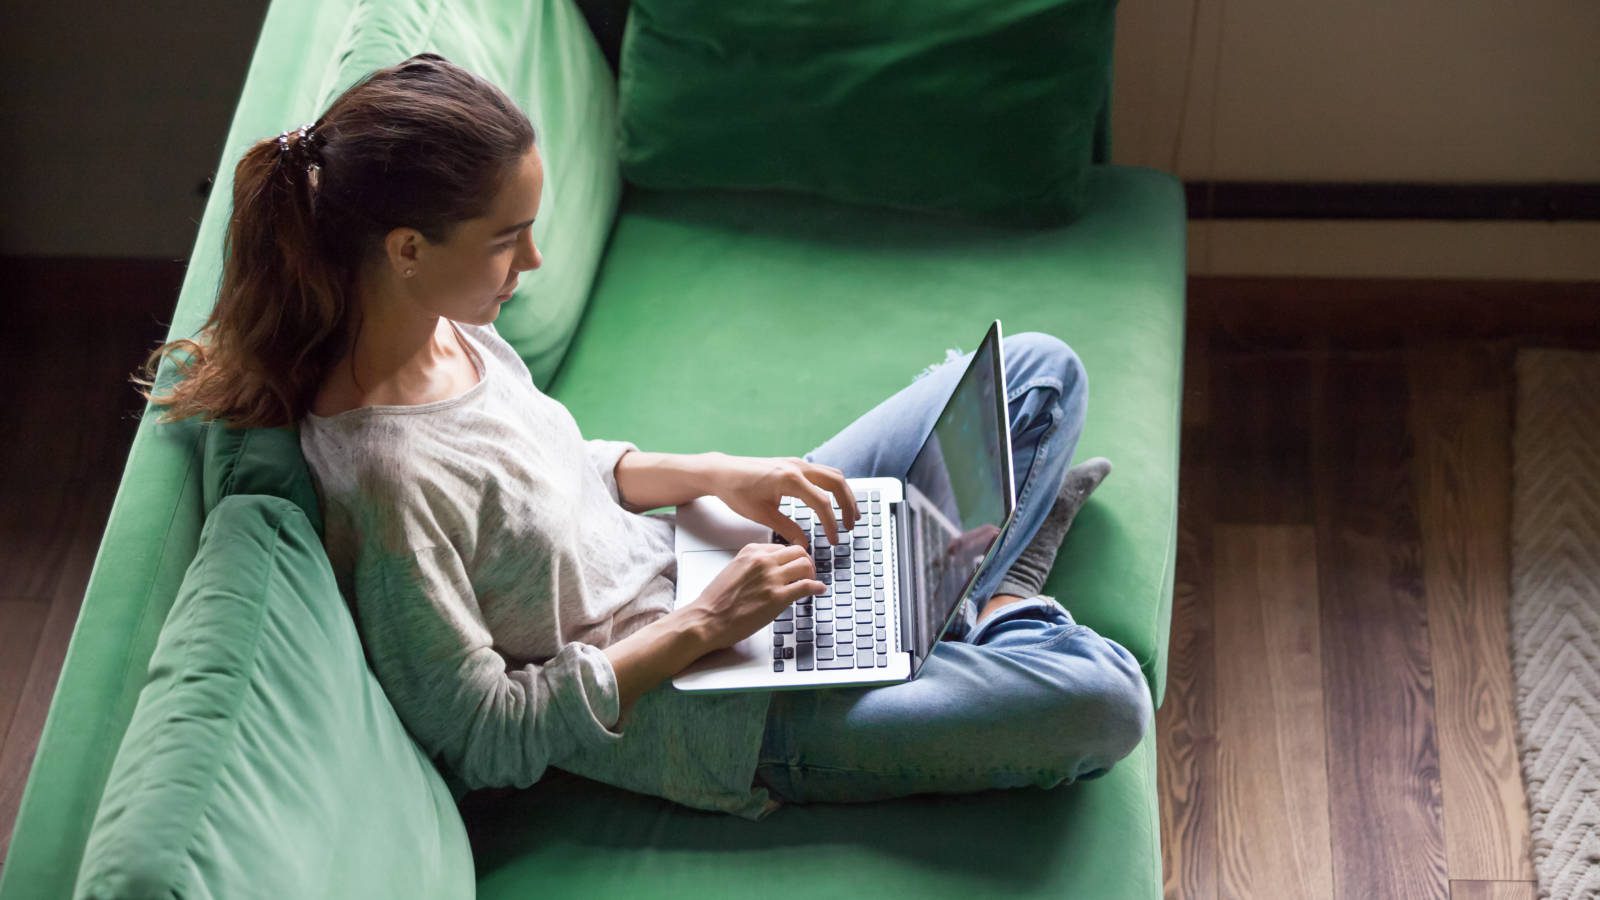 Millennial woman checking news, working online on laptop at home